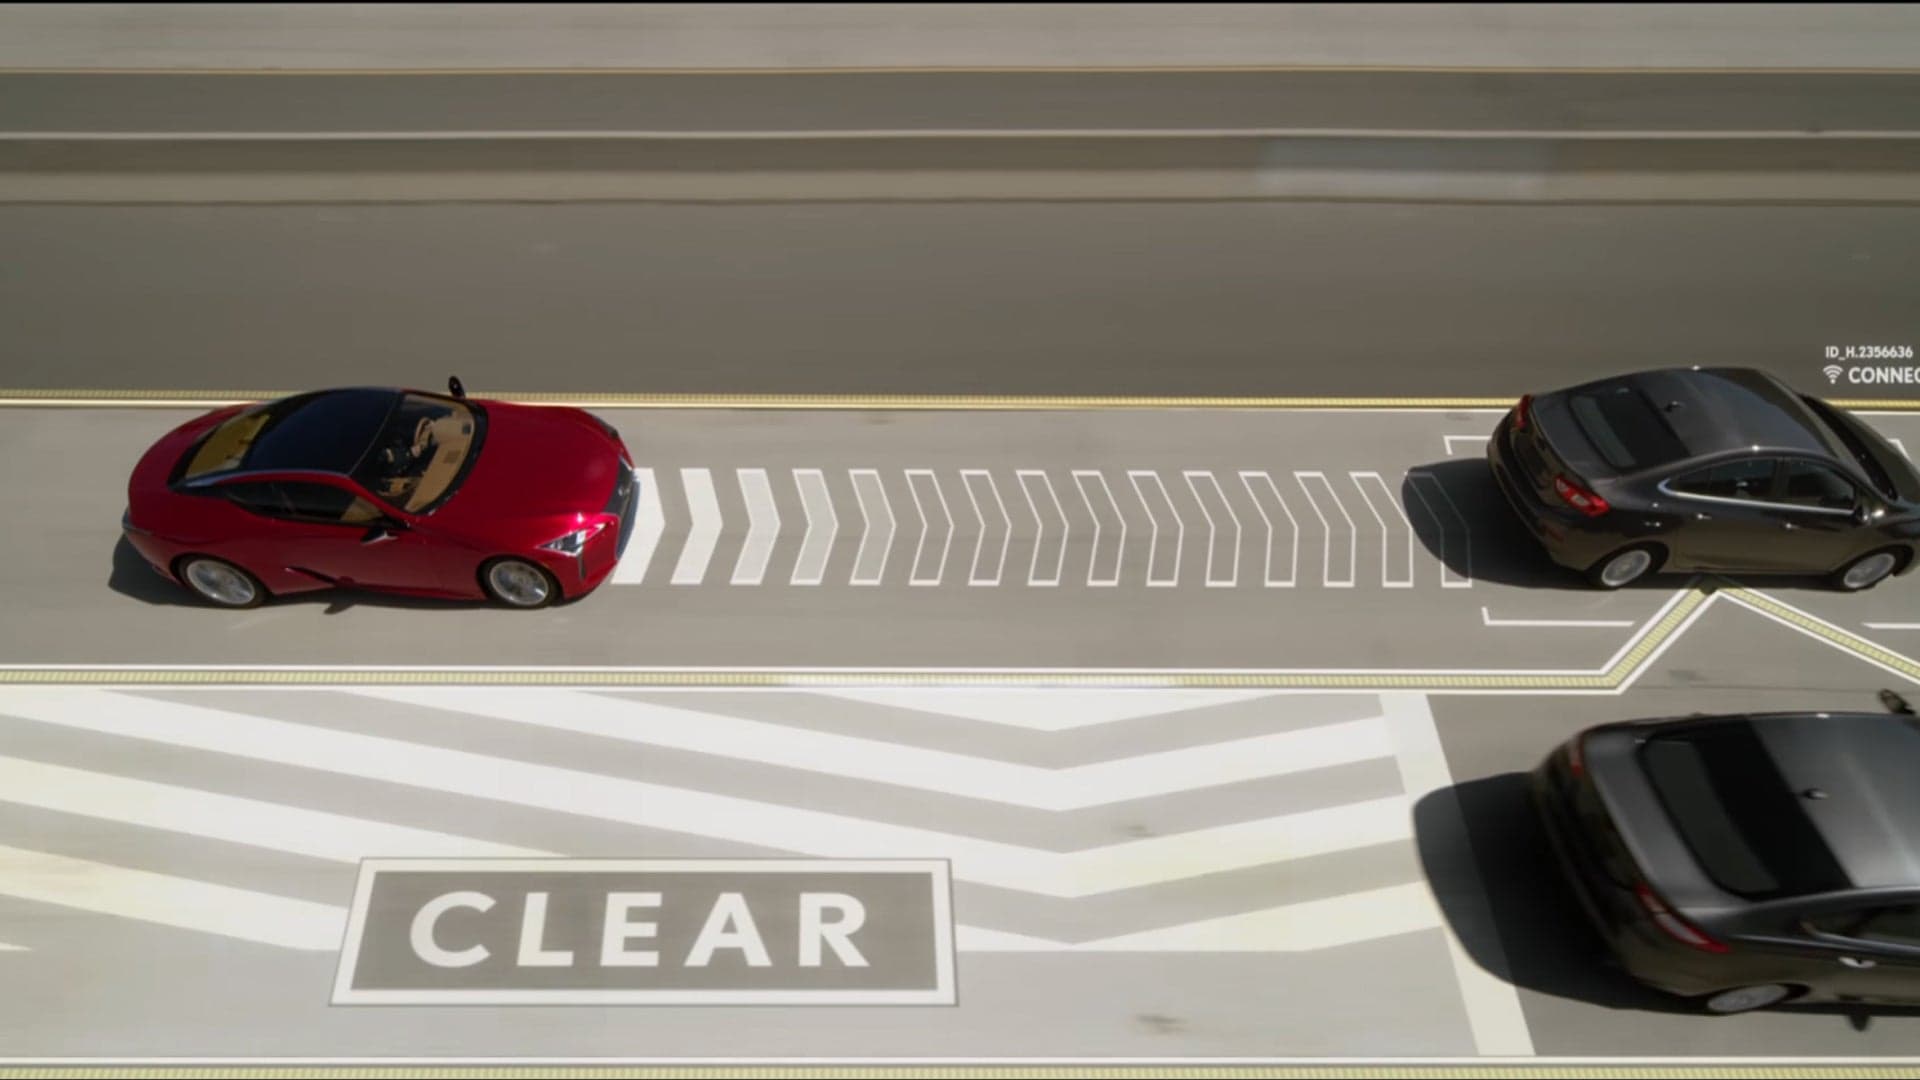 Lexus Jumps Into April Fools’ Day With Lane Valet Automation